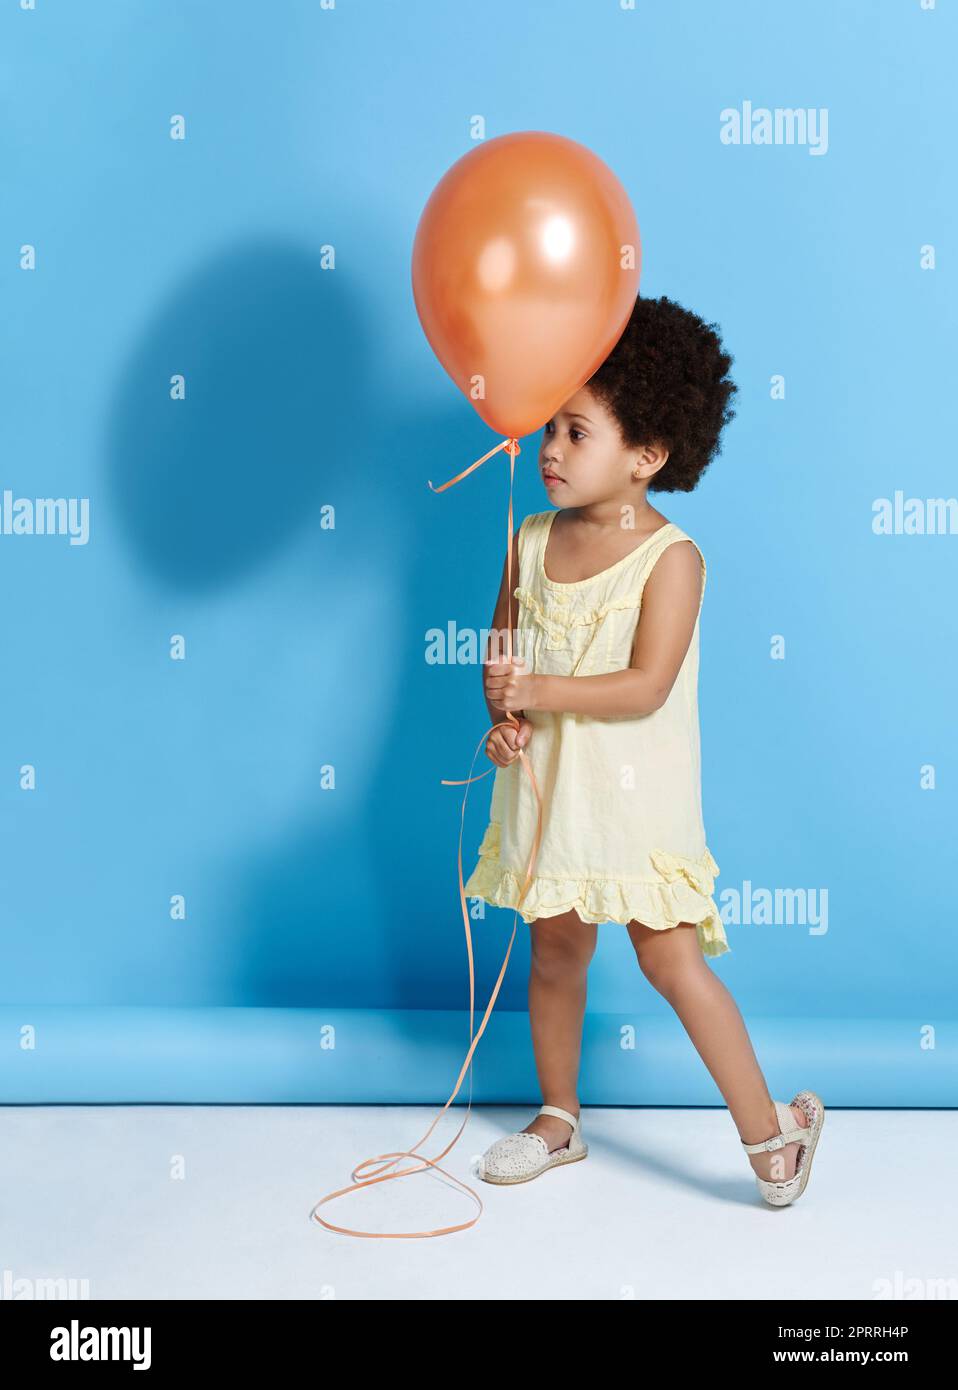 Shall we dance Mr. Balloon. a cute little girl holding a balloon over a blue background. Stock Photo